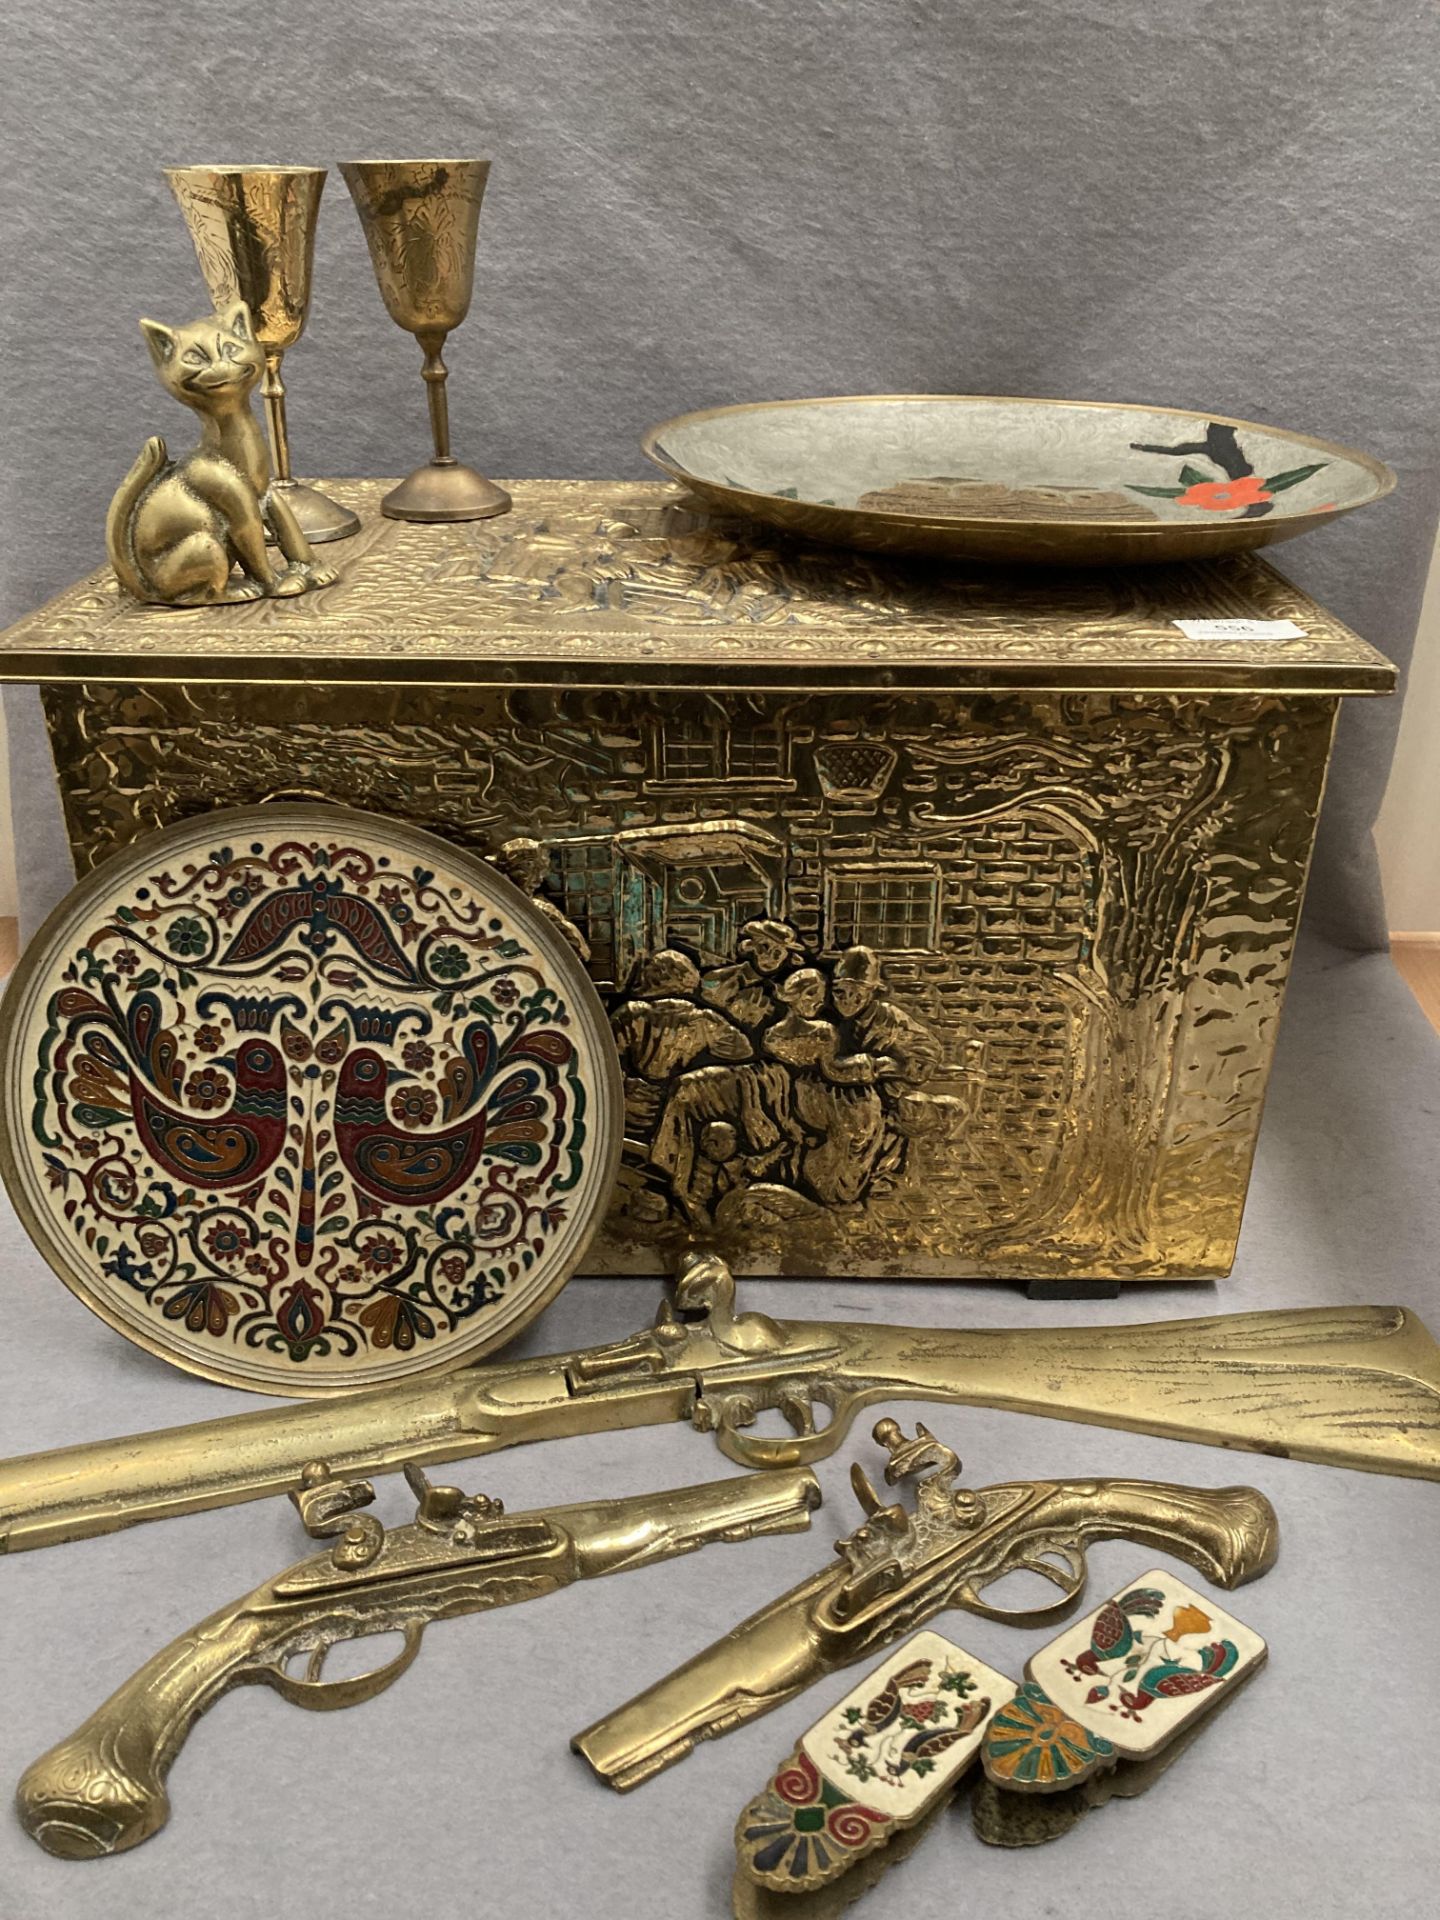 Decorative brass coal box and contents - three brass wall mounting dummy pistols, trays, goblets, - Image 2 of 2